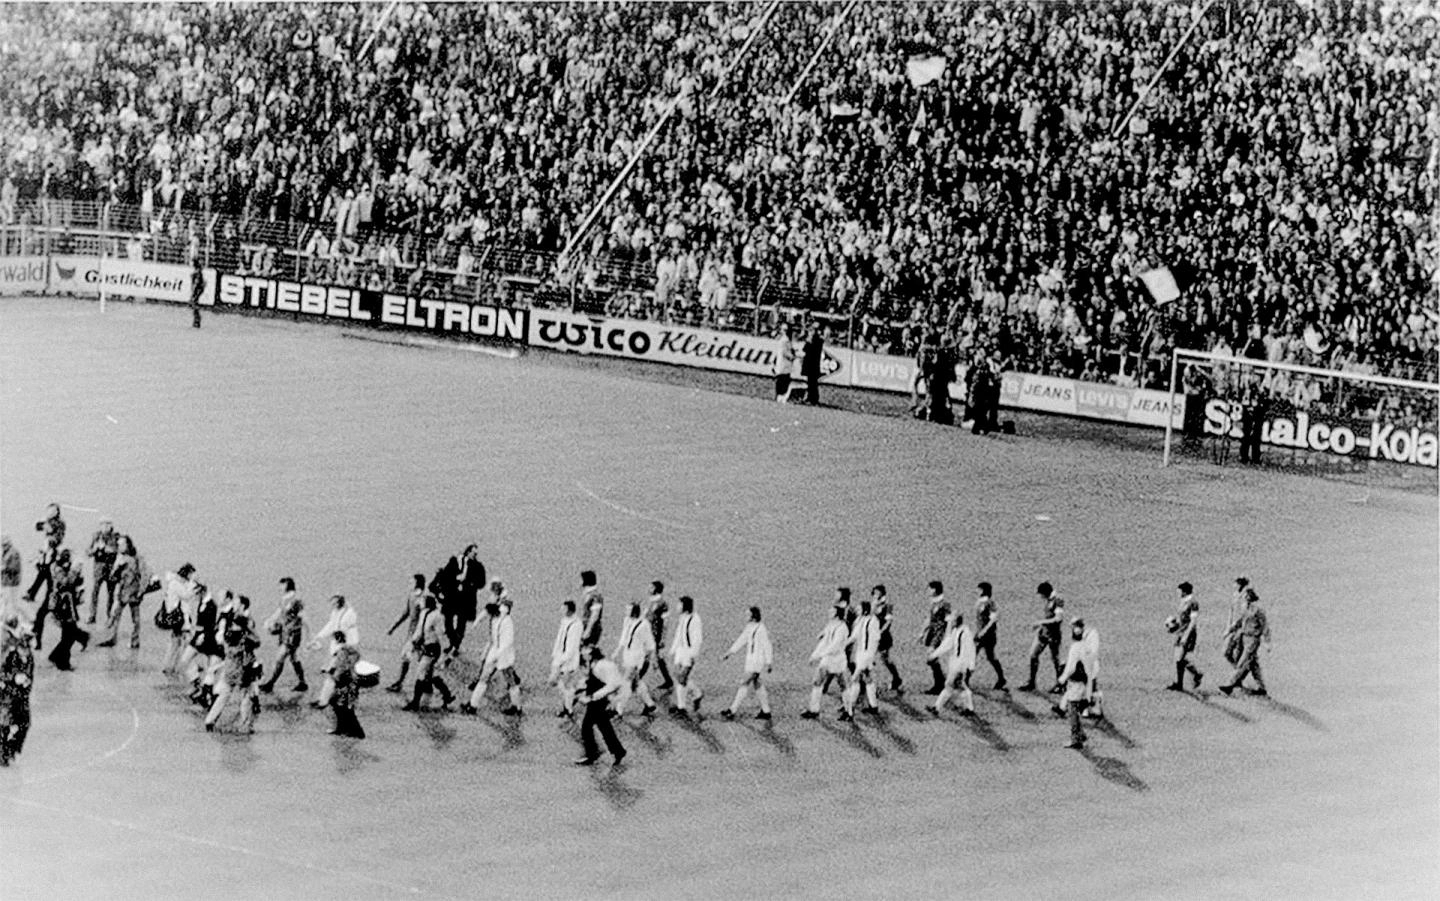 The teams emerge for the decisive UEFA Cup final second leg on this day in 1973